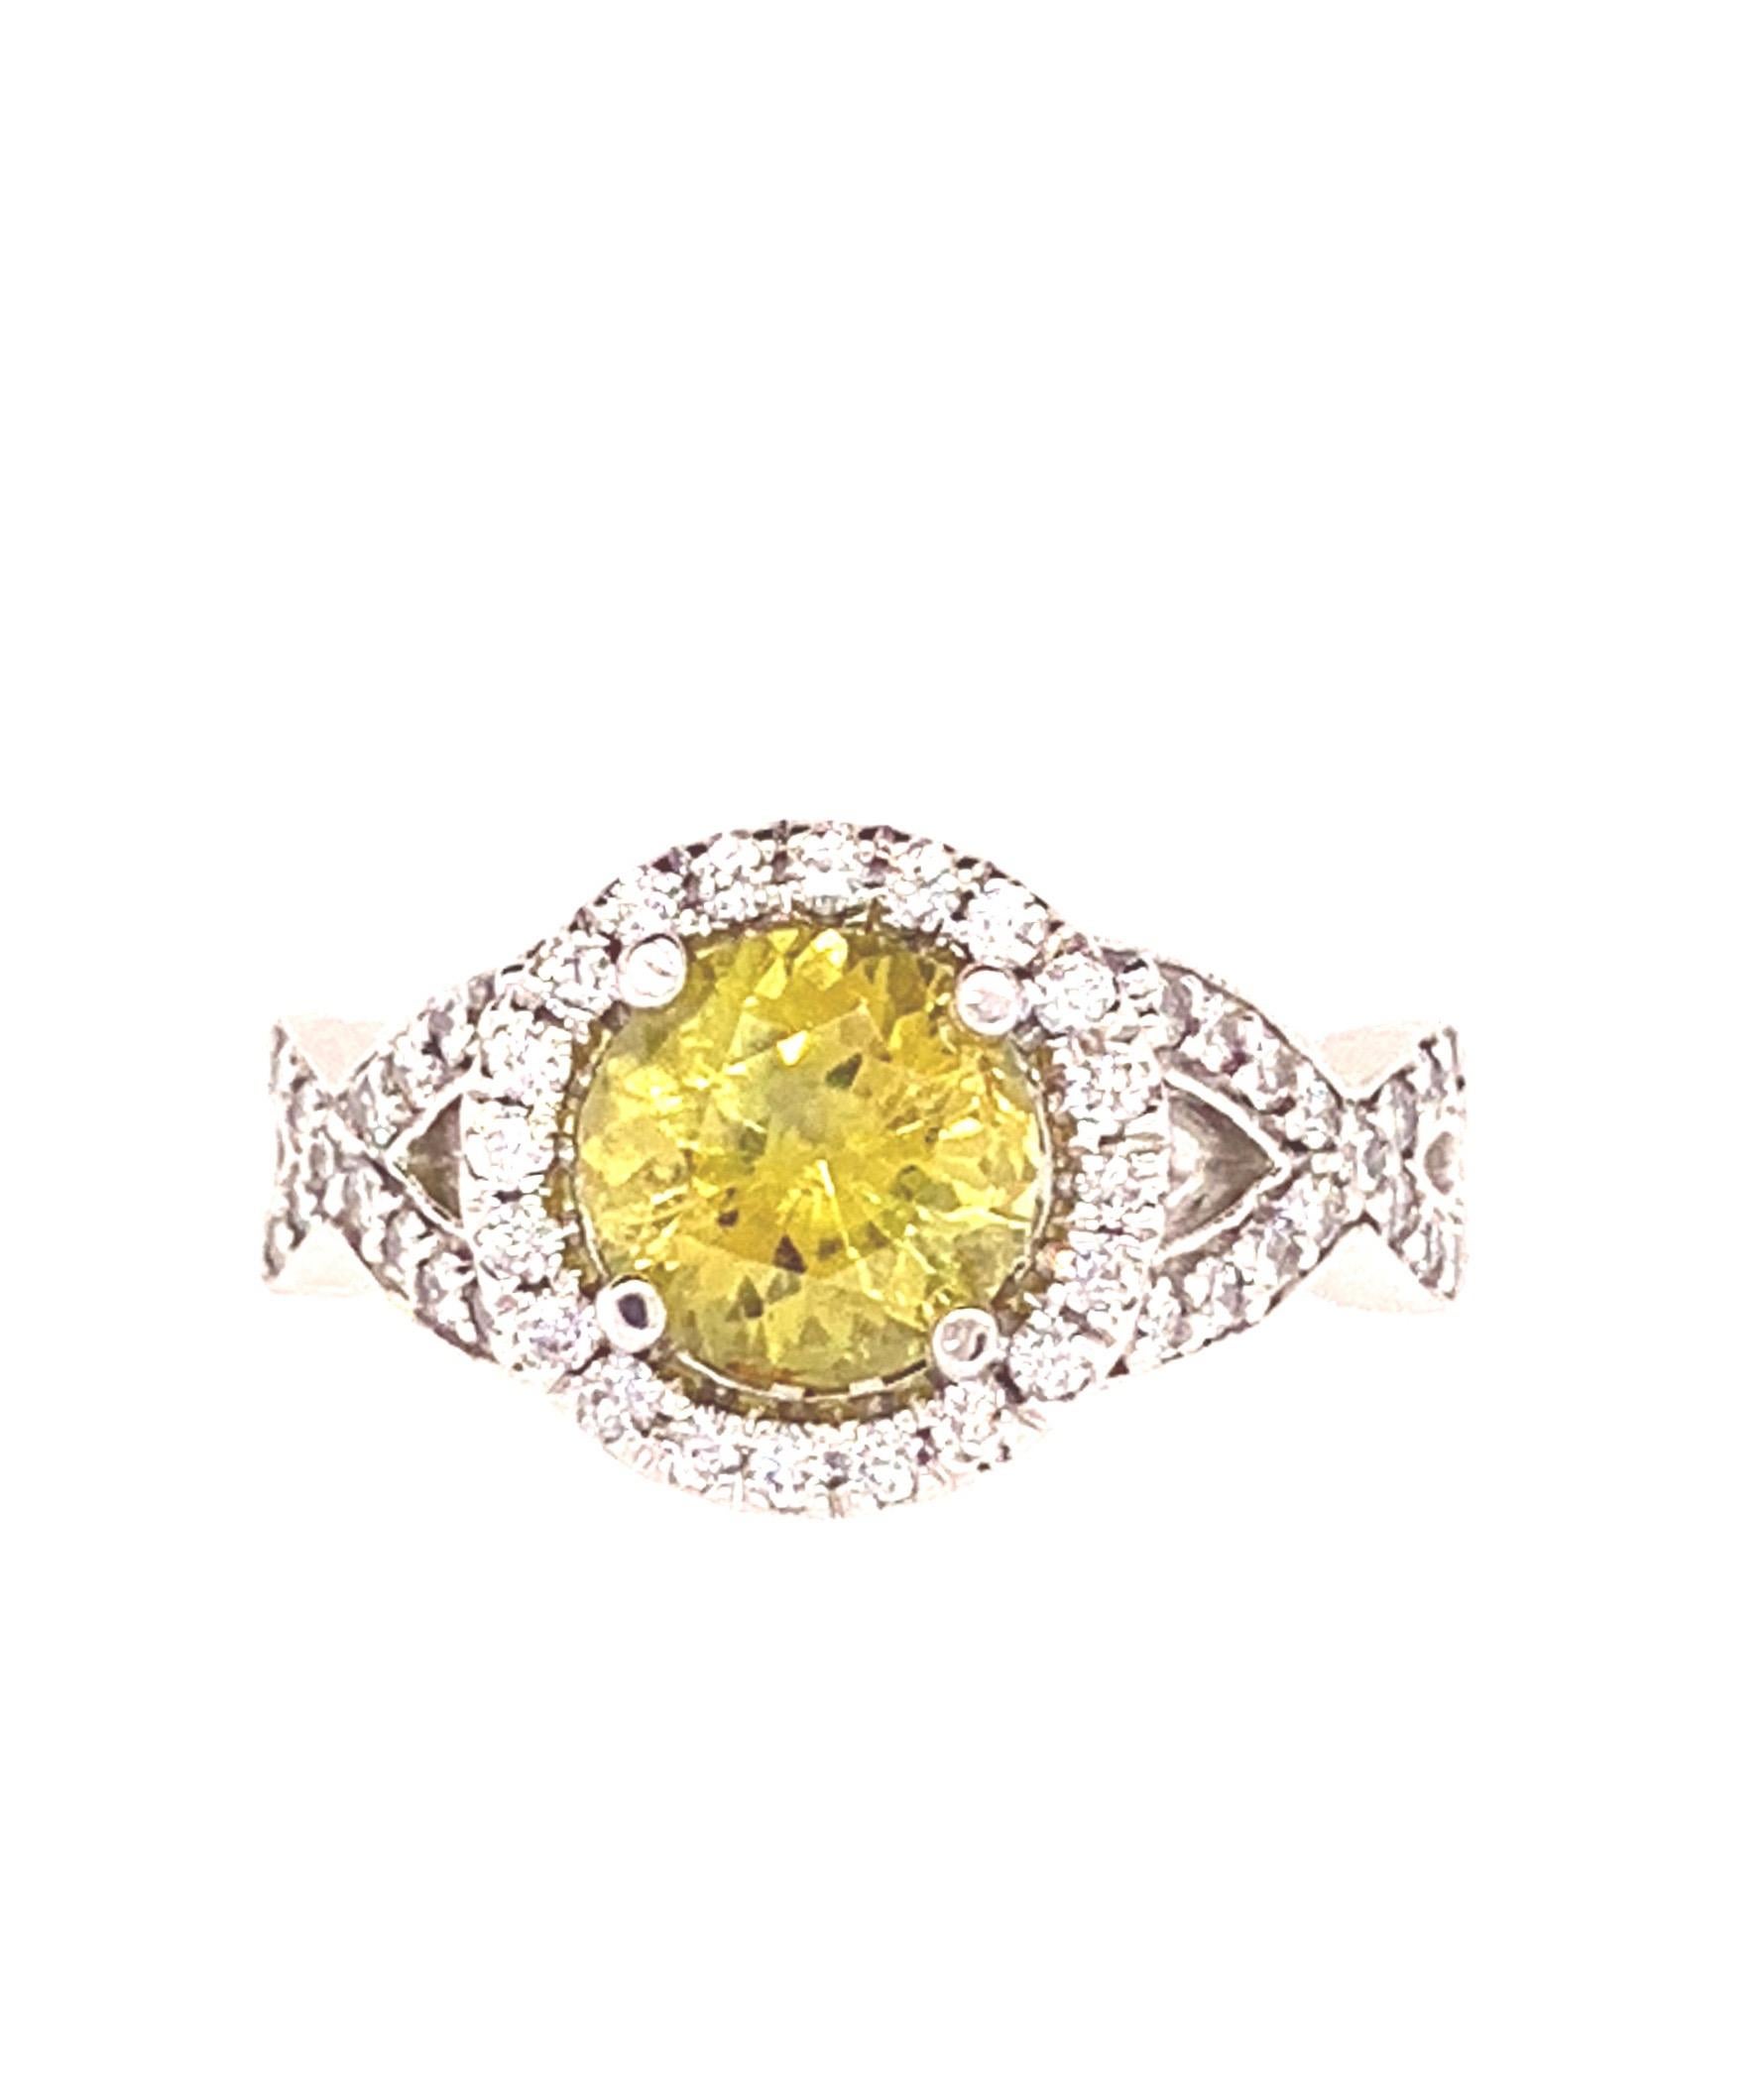 Chrysoberyl is one of the unusual gemstones that is 8.5 in hardness, Alexandrite and some cats eyes also belong to this family.  They are very wearable and are safe to wear on a daily basis, putting them on our list as good  engagement ring